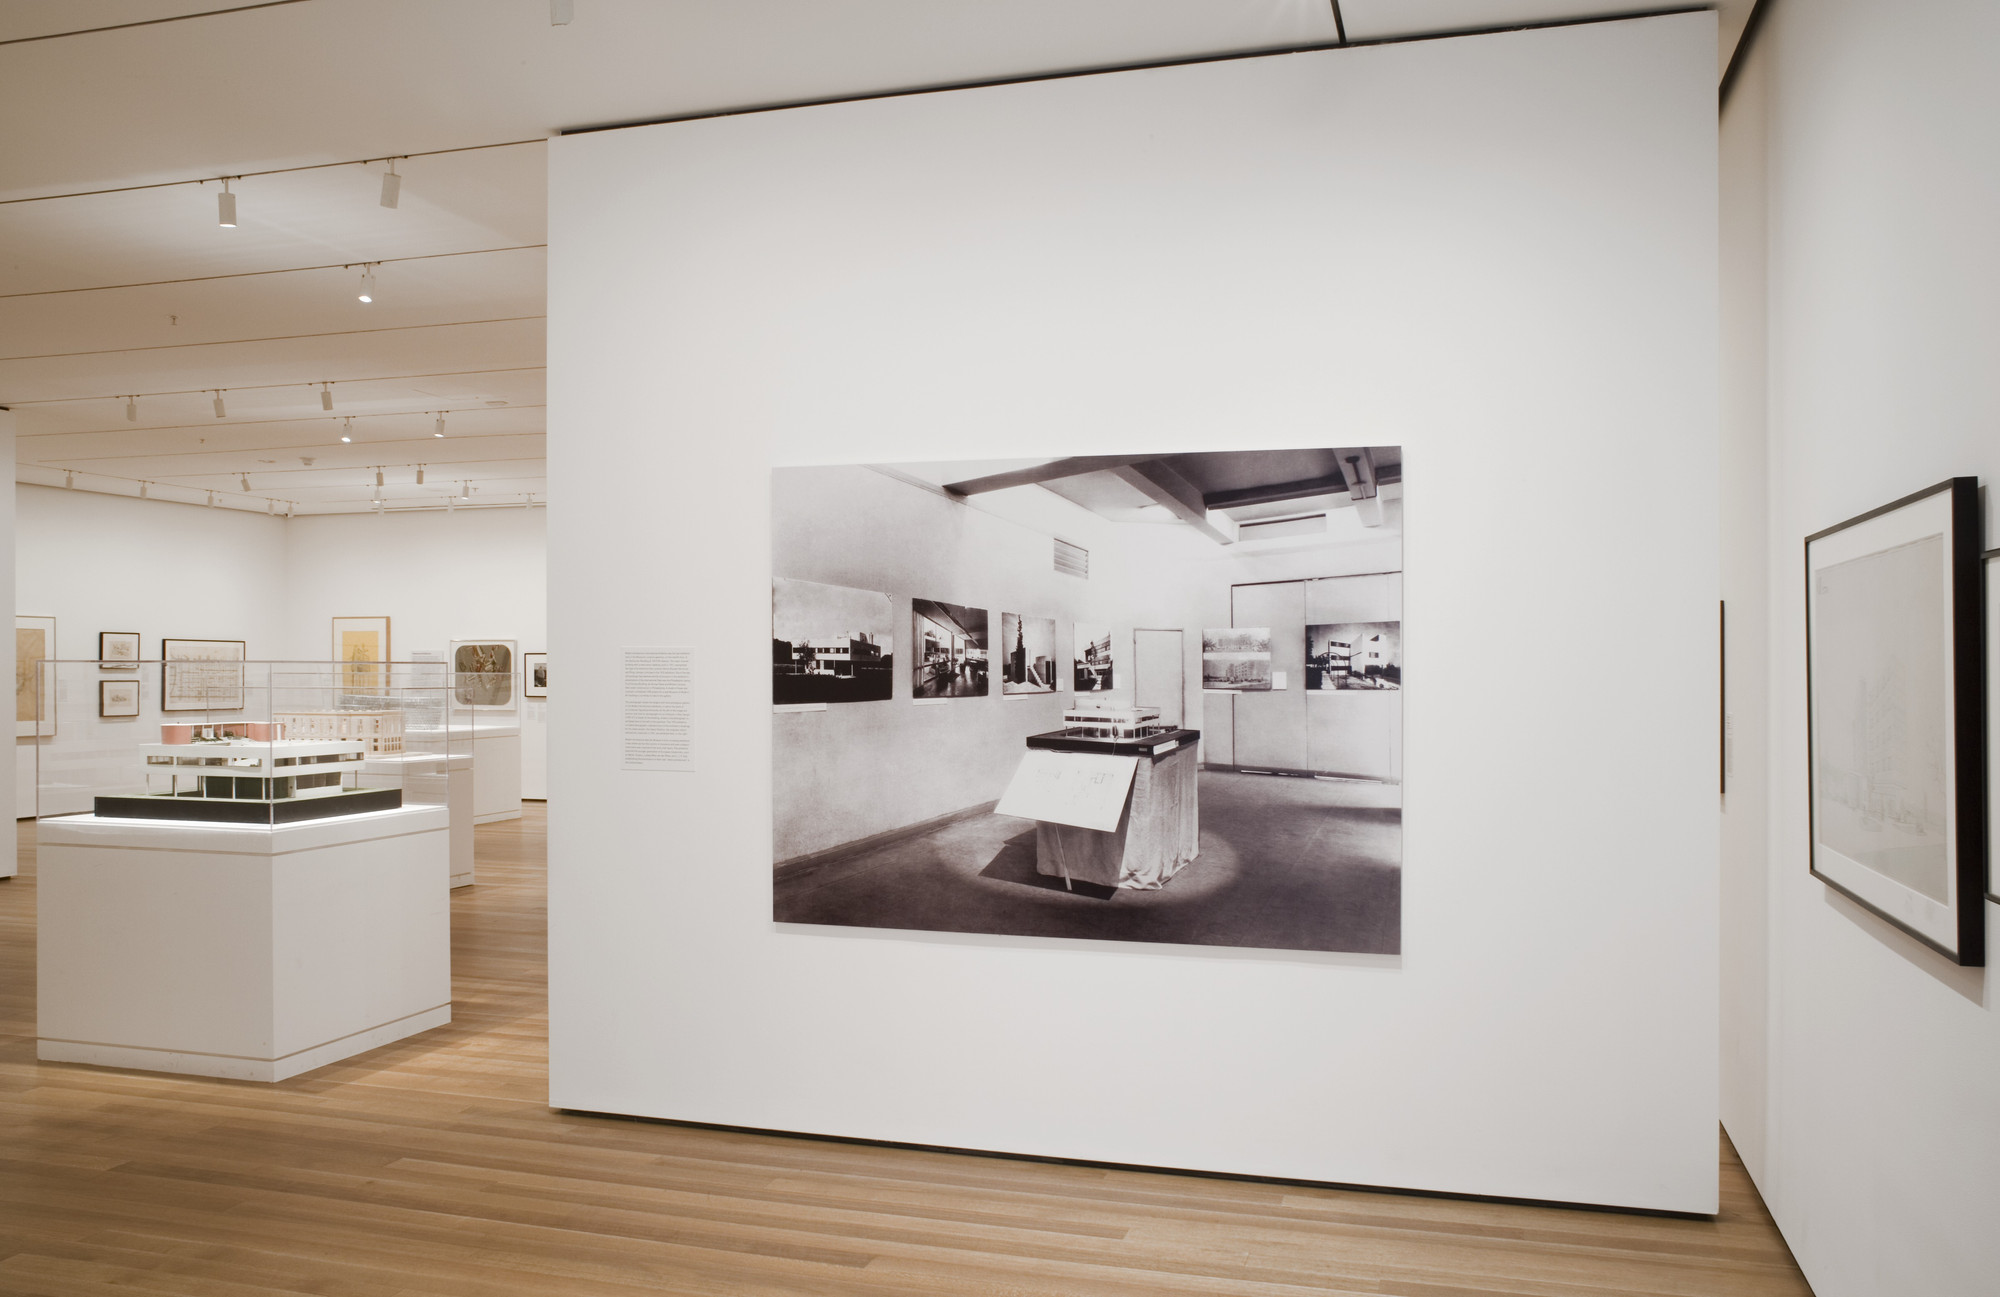 Installation view of the exhibition, 